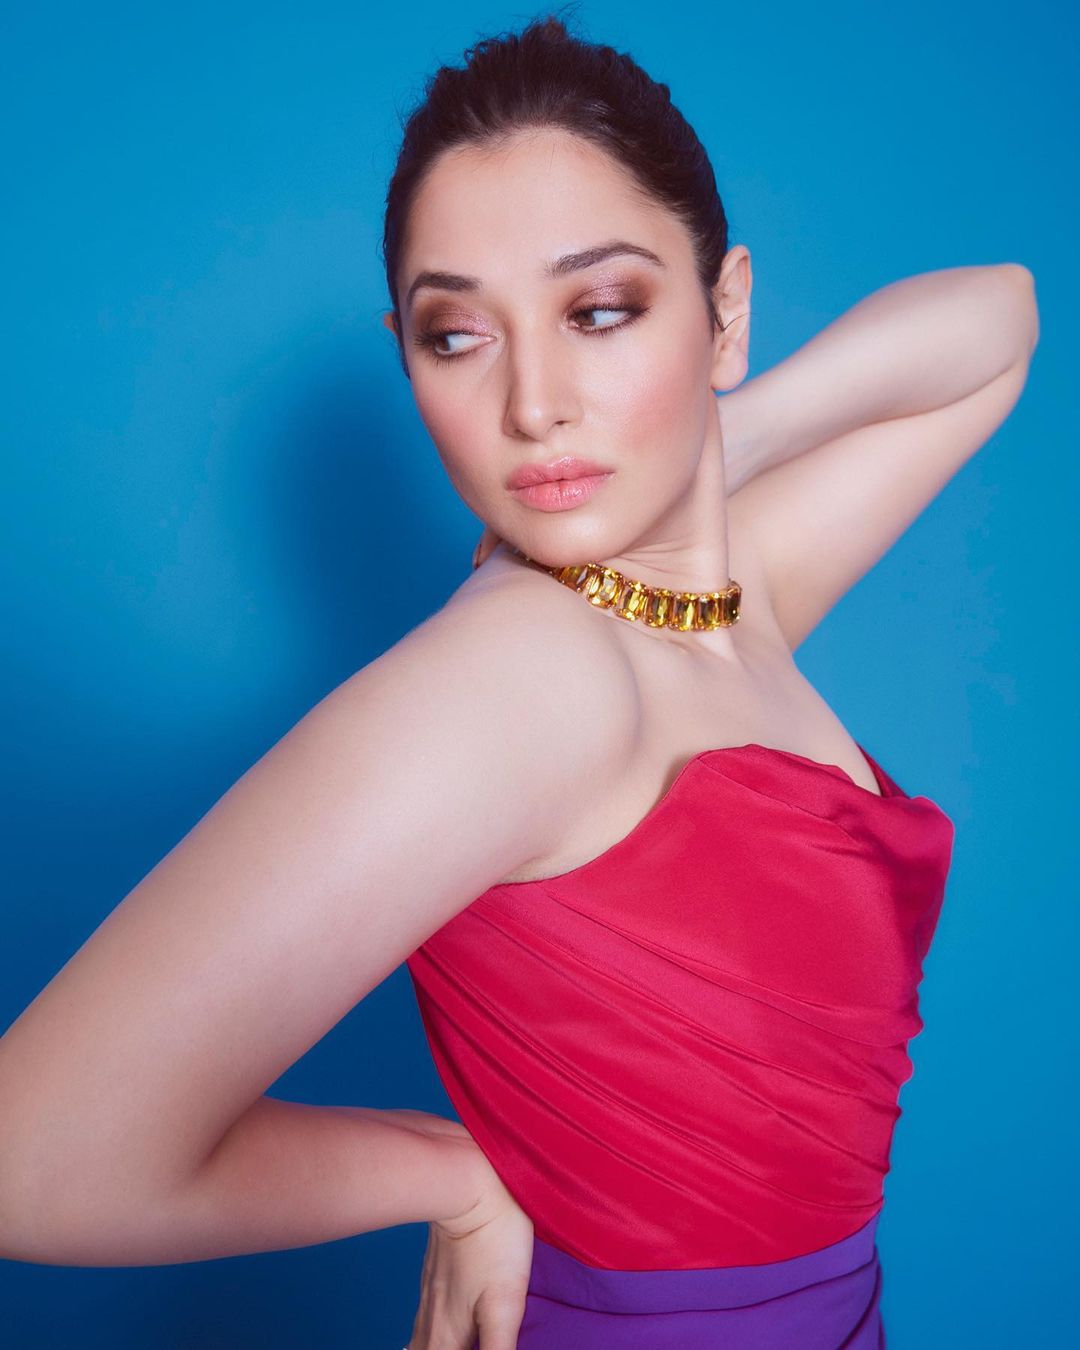 Tamannaah wears Pink and Purple Outfit  Designed by Saisha Shinde, December 2021 2